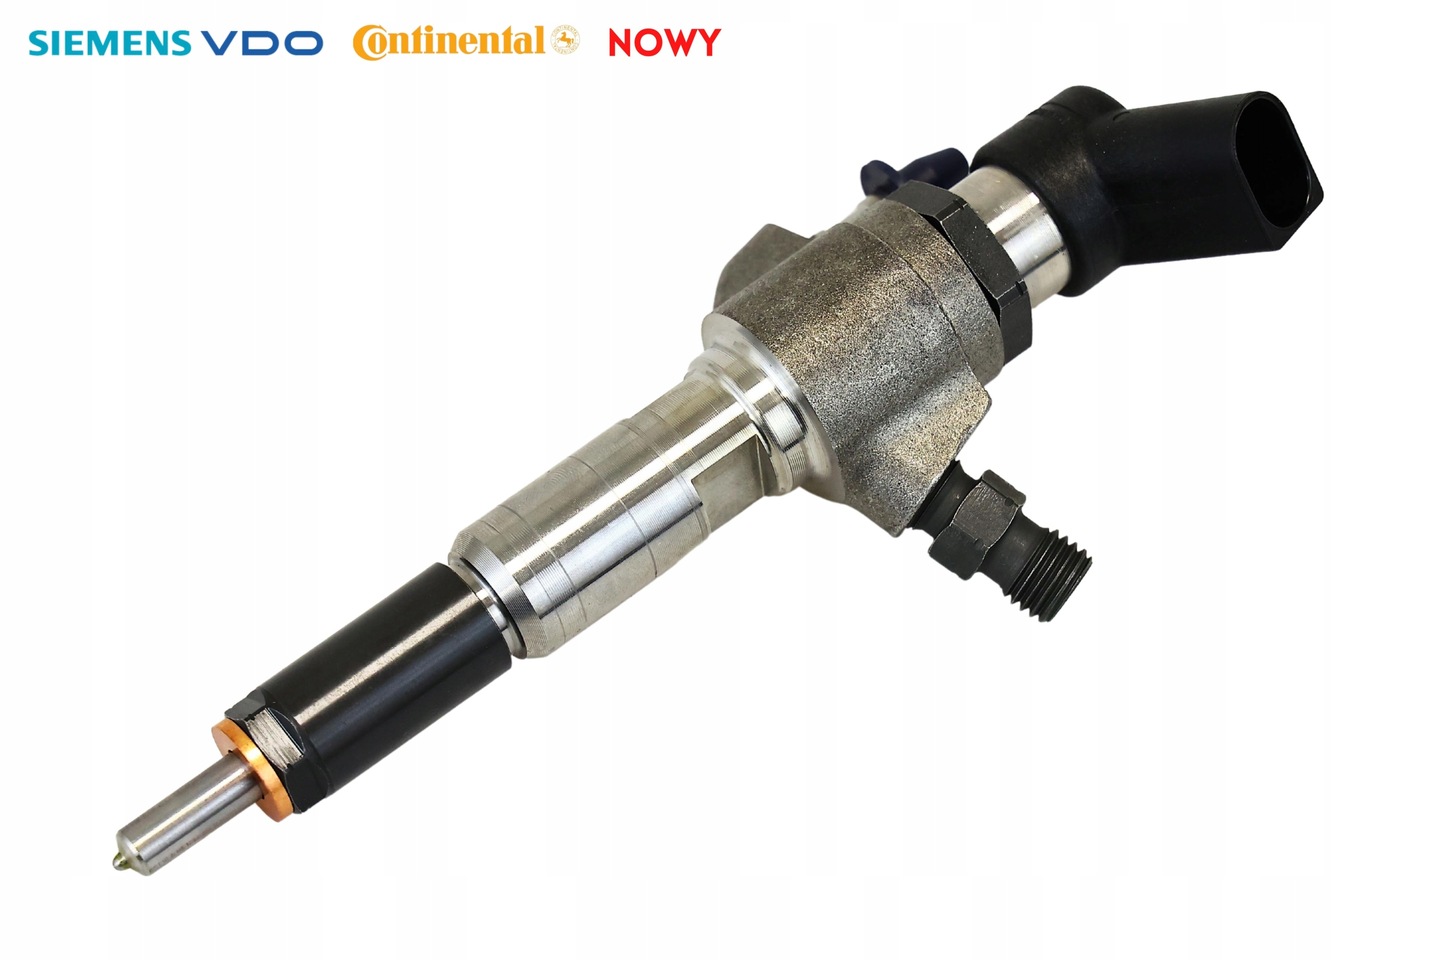 Injection nozzle injector Ford Volvo Peugeot Mazda 1.6 HDI  9674973080-9802448680